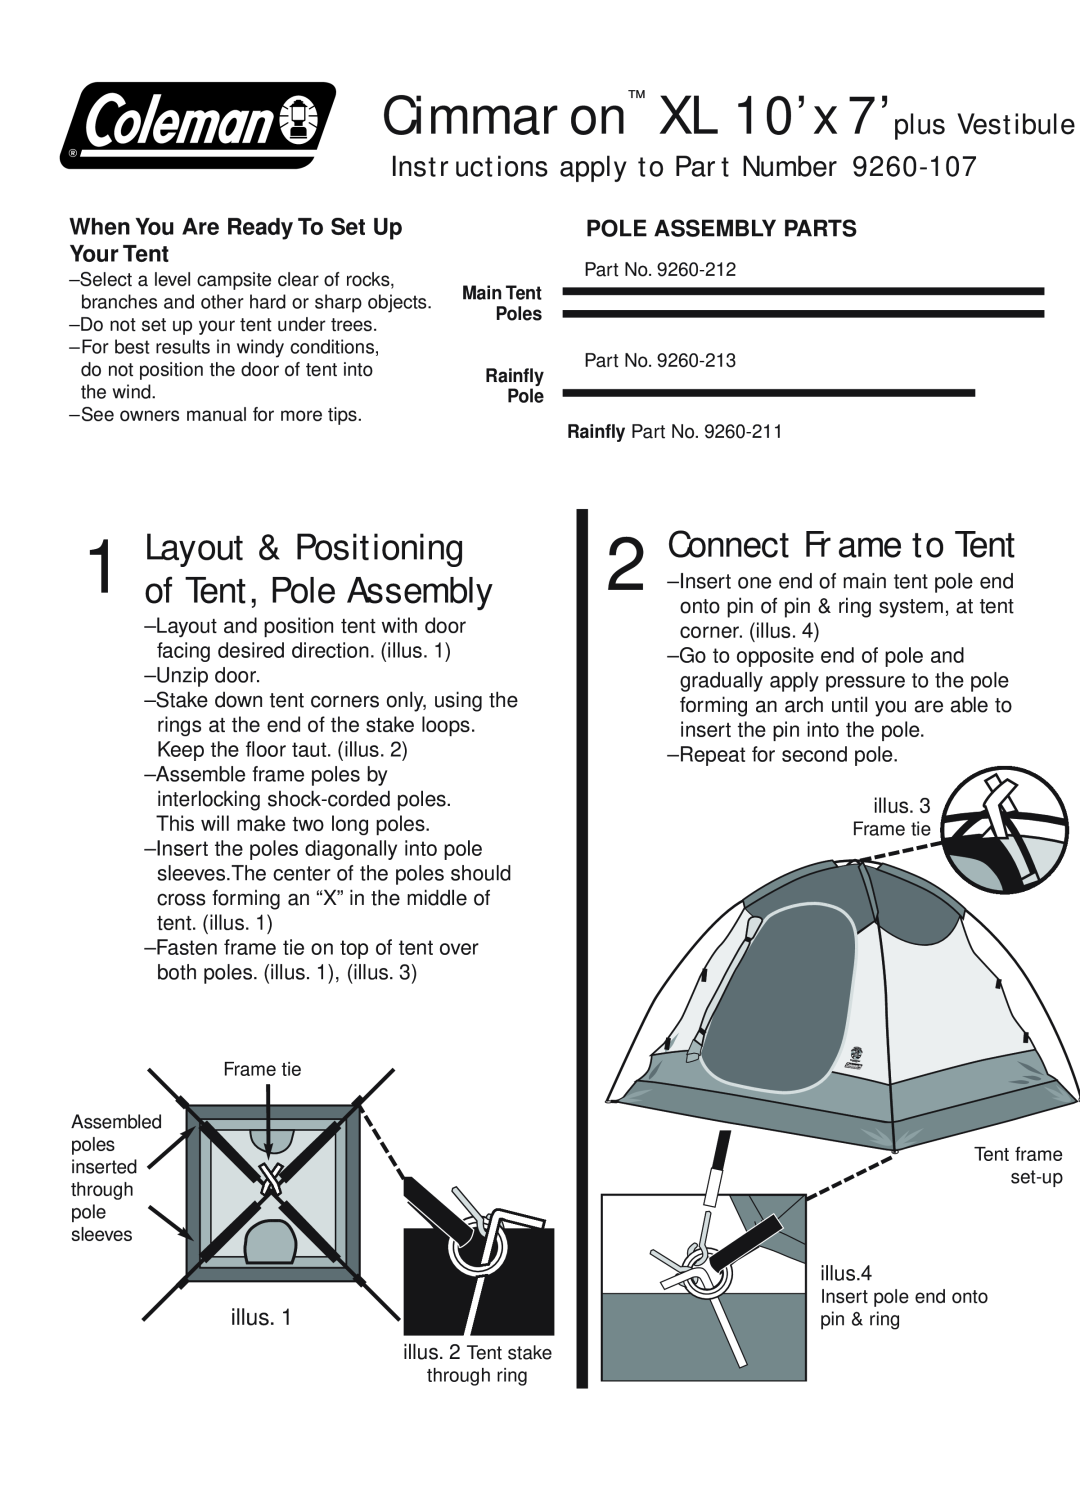 Coleman 9260-212 owner manual Instructions apply to Part Number, Layout & Positioning of Tent, Pole Assembly, illus 